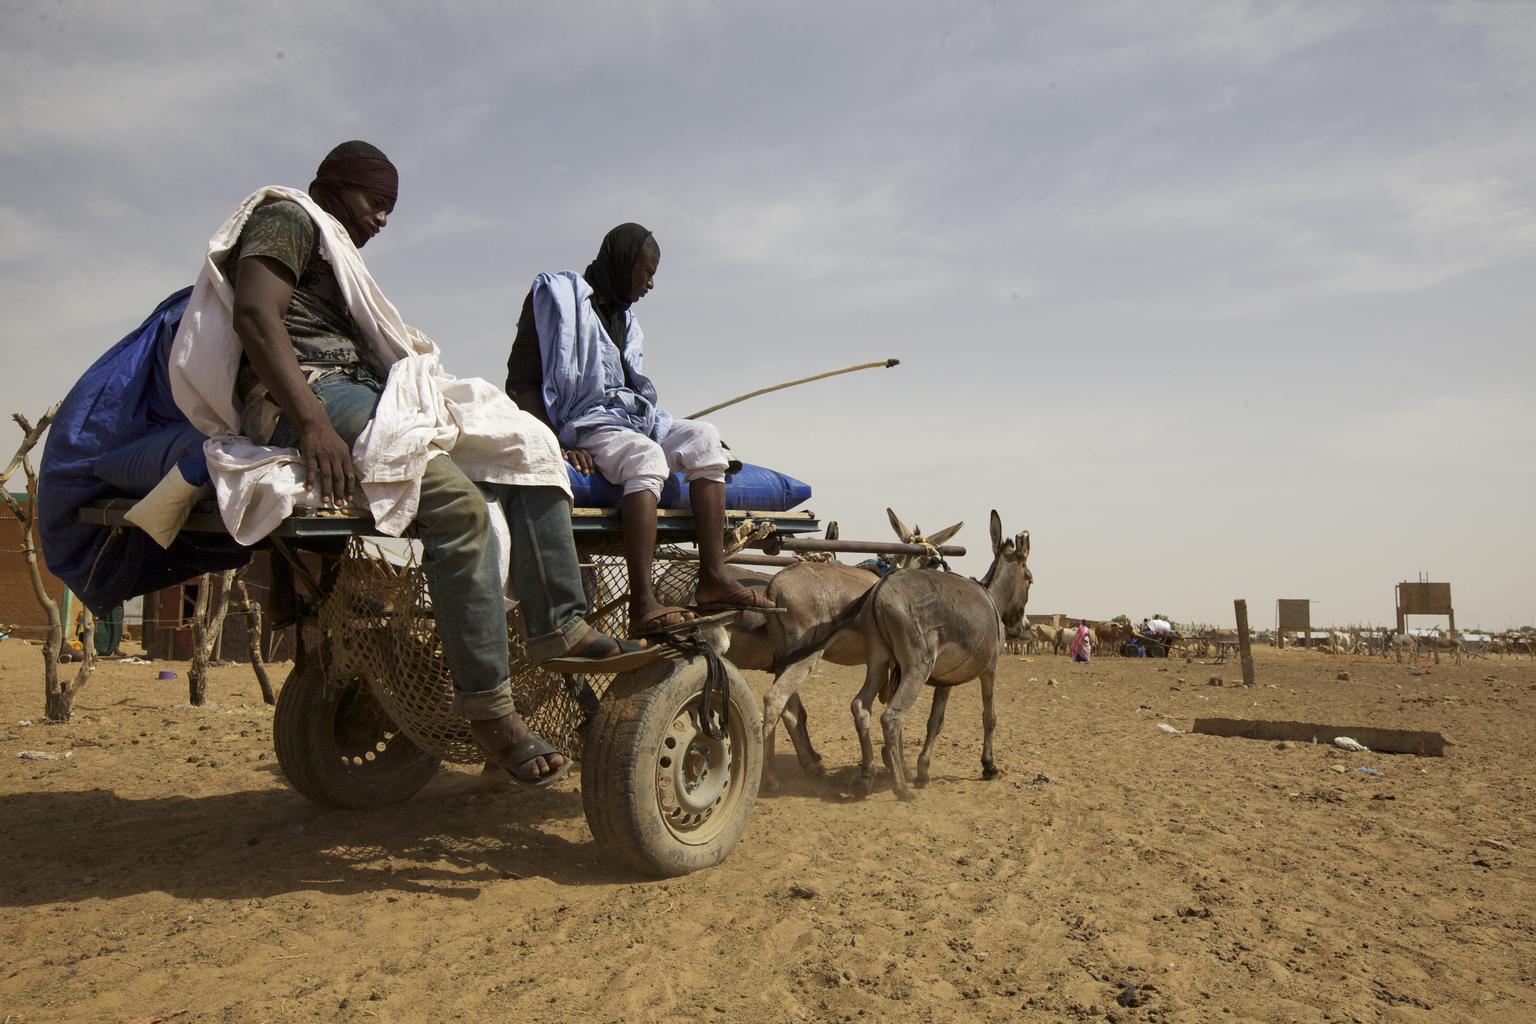 UN CERF releases funds to avert acute hunger and malnutrition in the Sahel